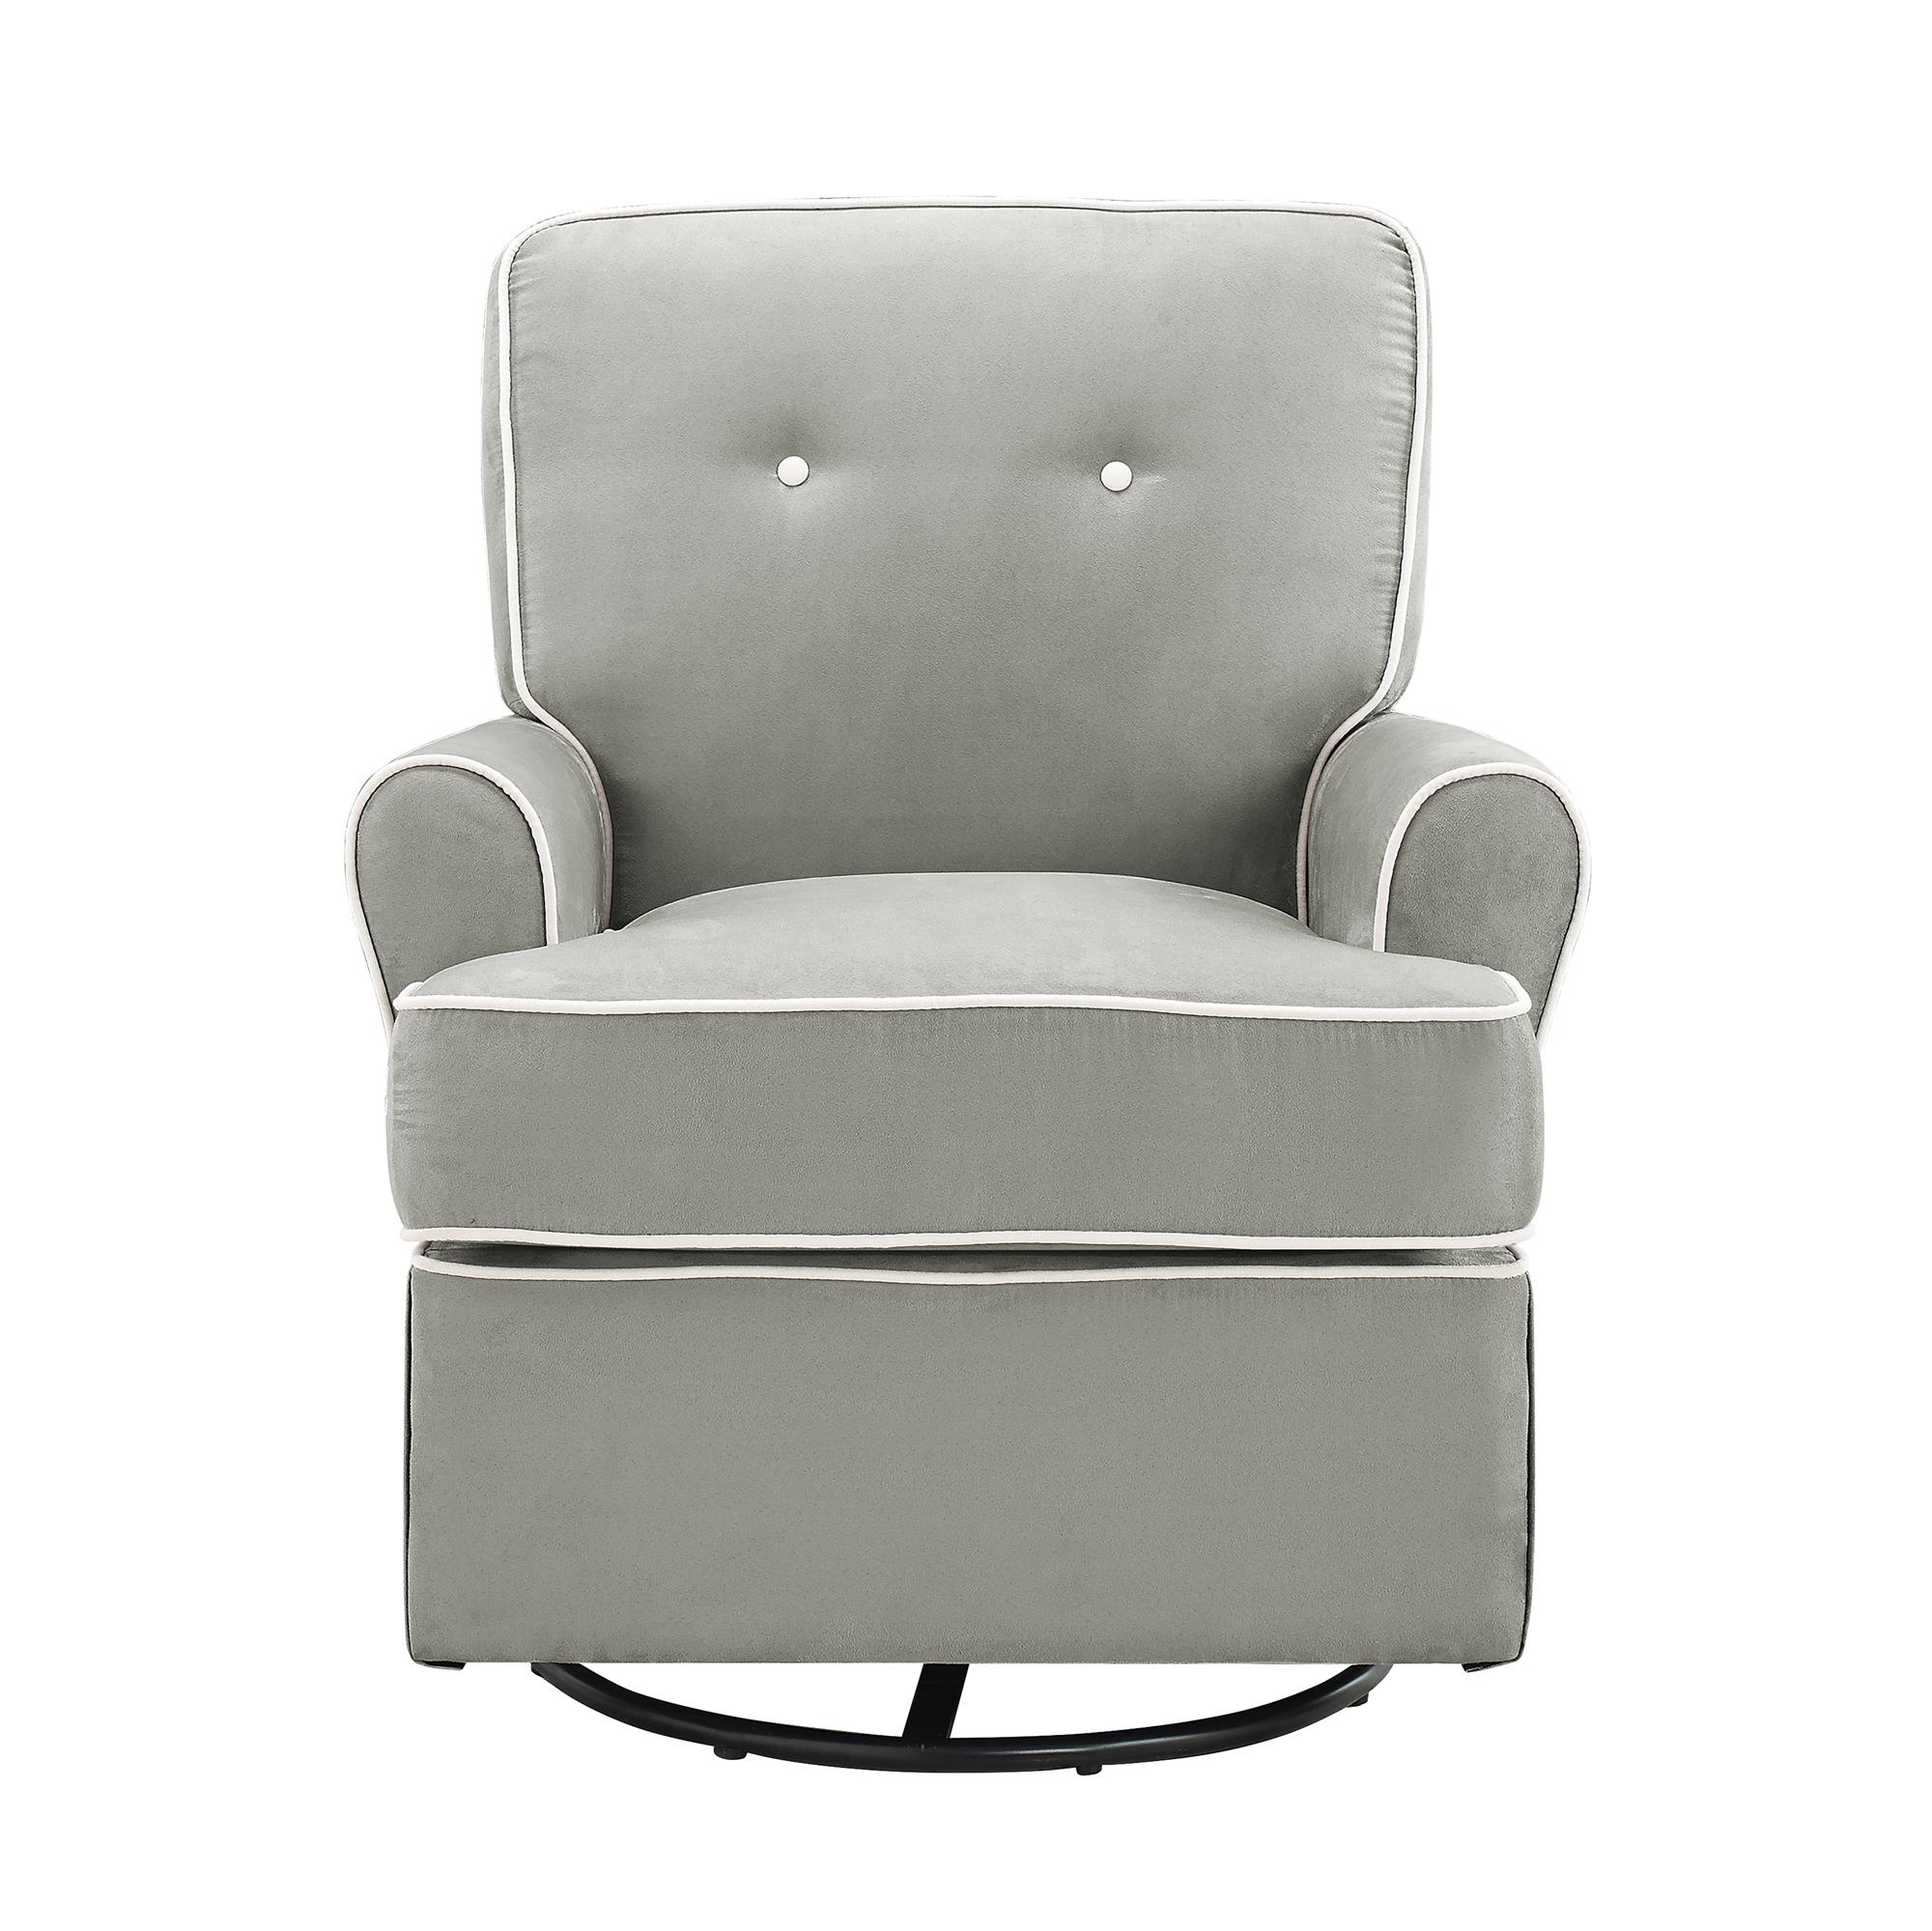 Baby Relax Tinsley Swivel Glider Gray - image 2 of 8